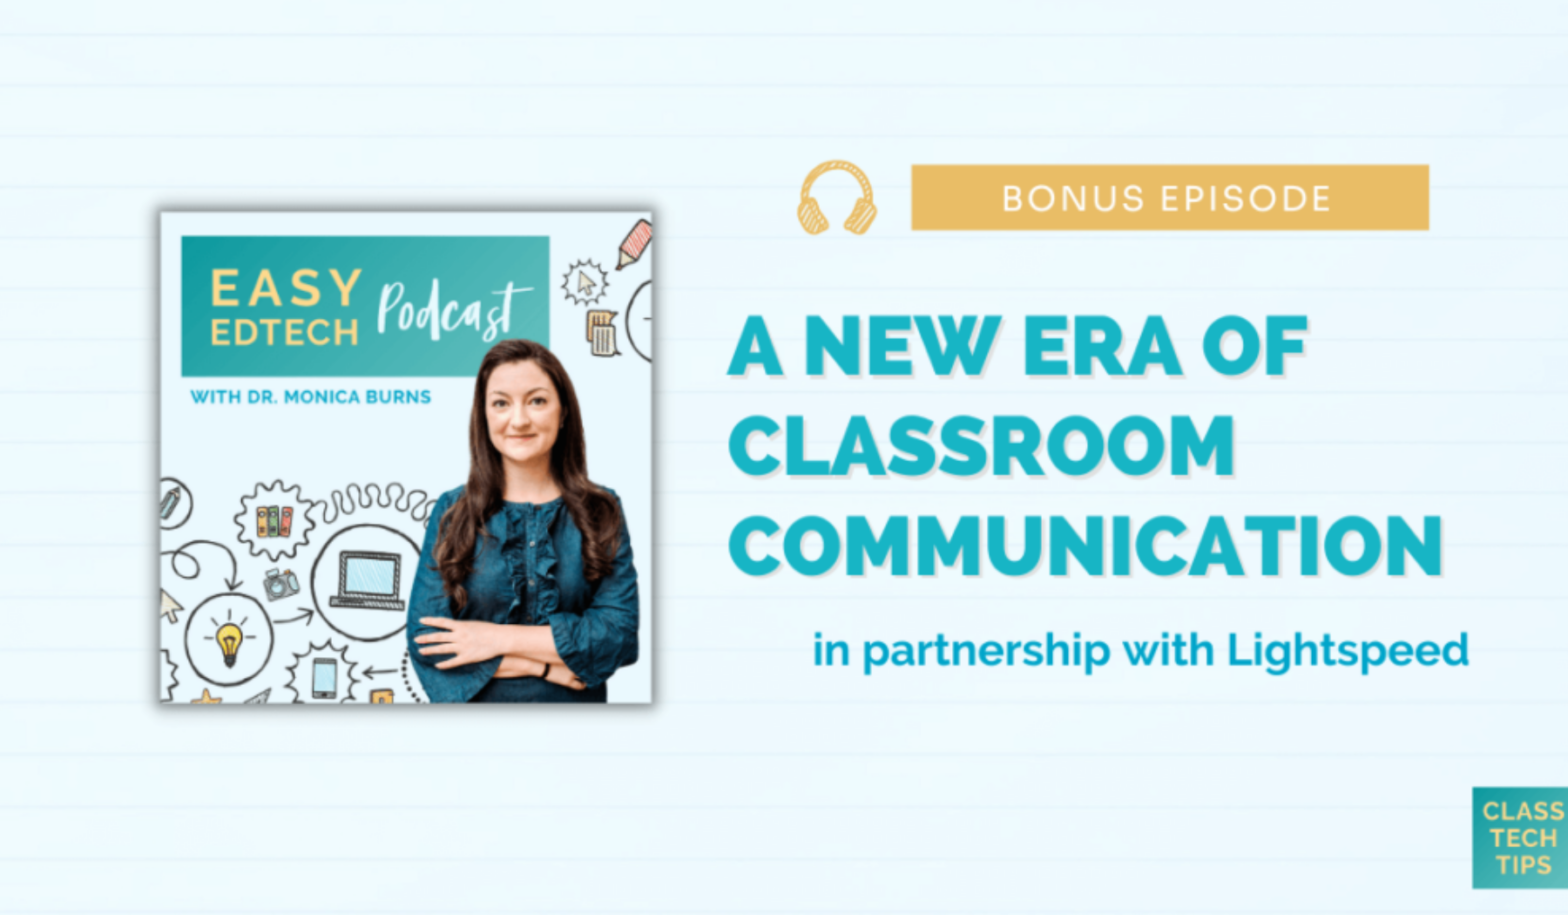 Lightspeed Blog Featured Images (1) Easy EdTech Podcast, New Era of Classroom Communication with Lightspeed Instructional Audio Systems